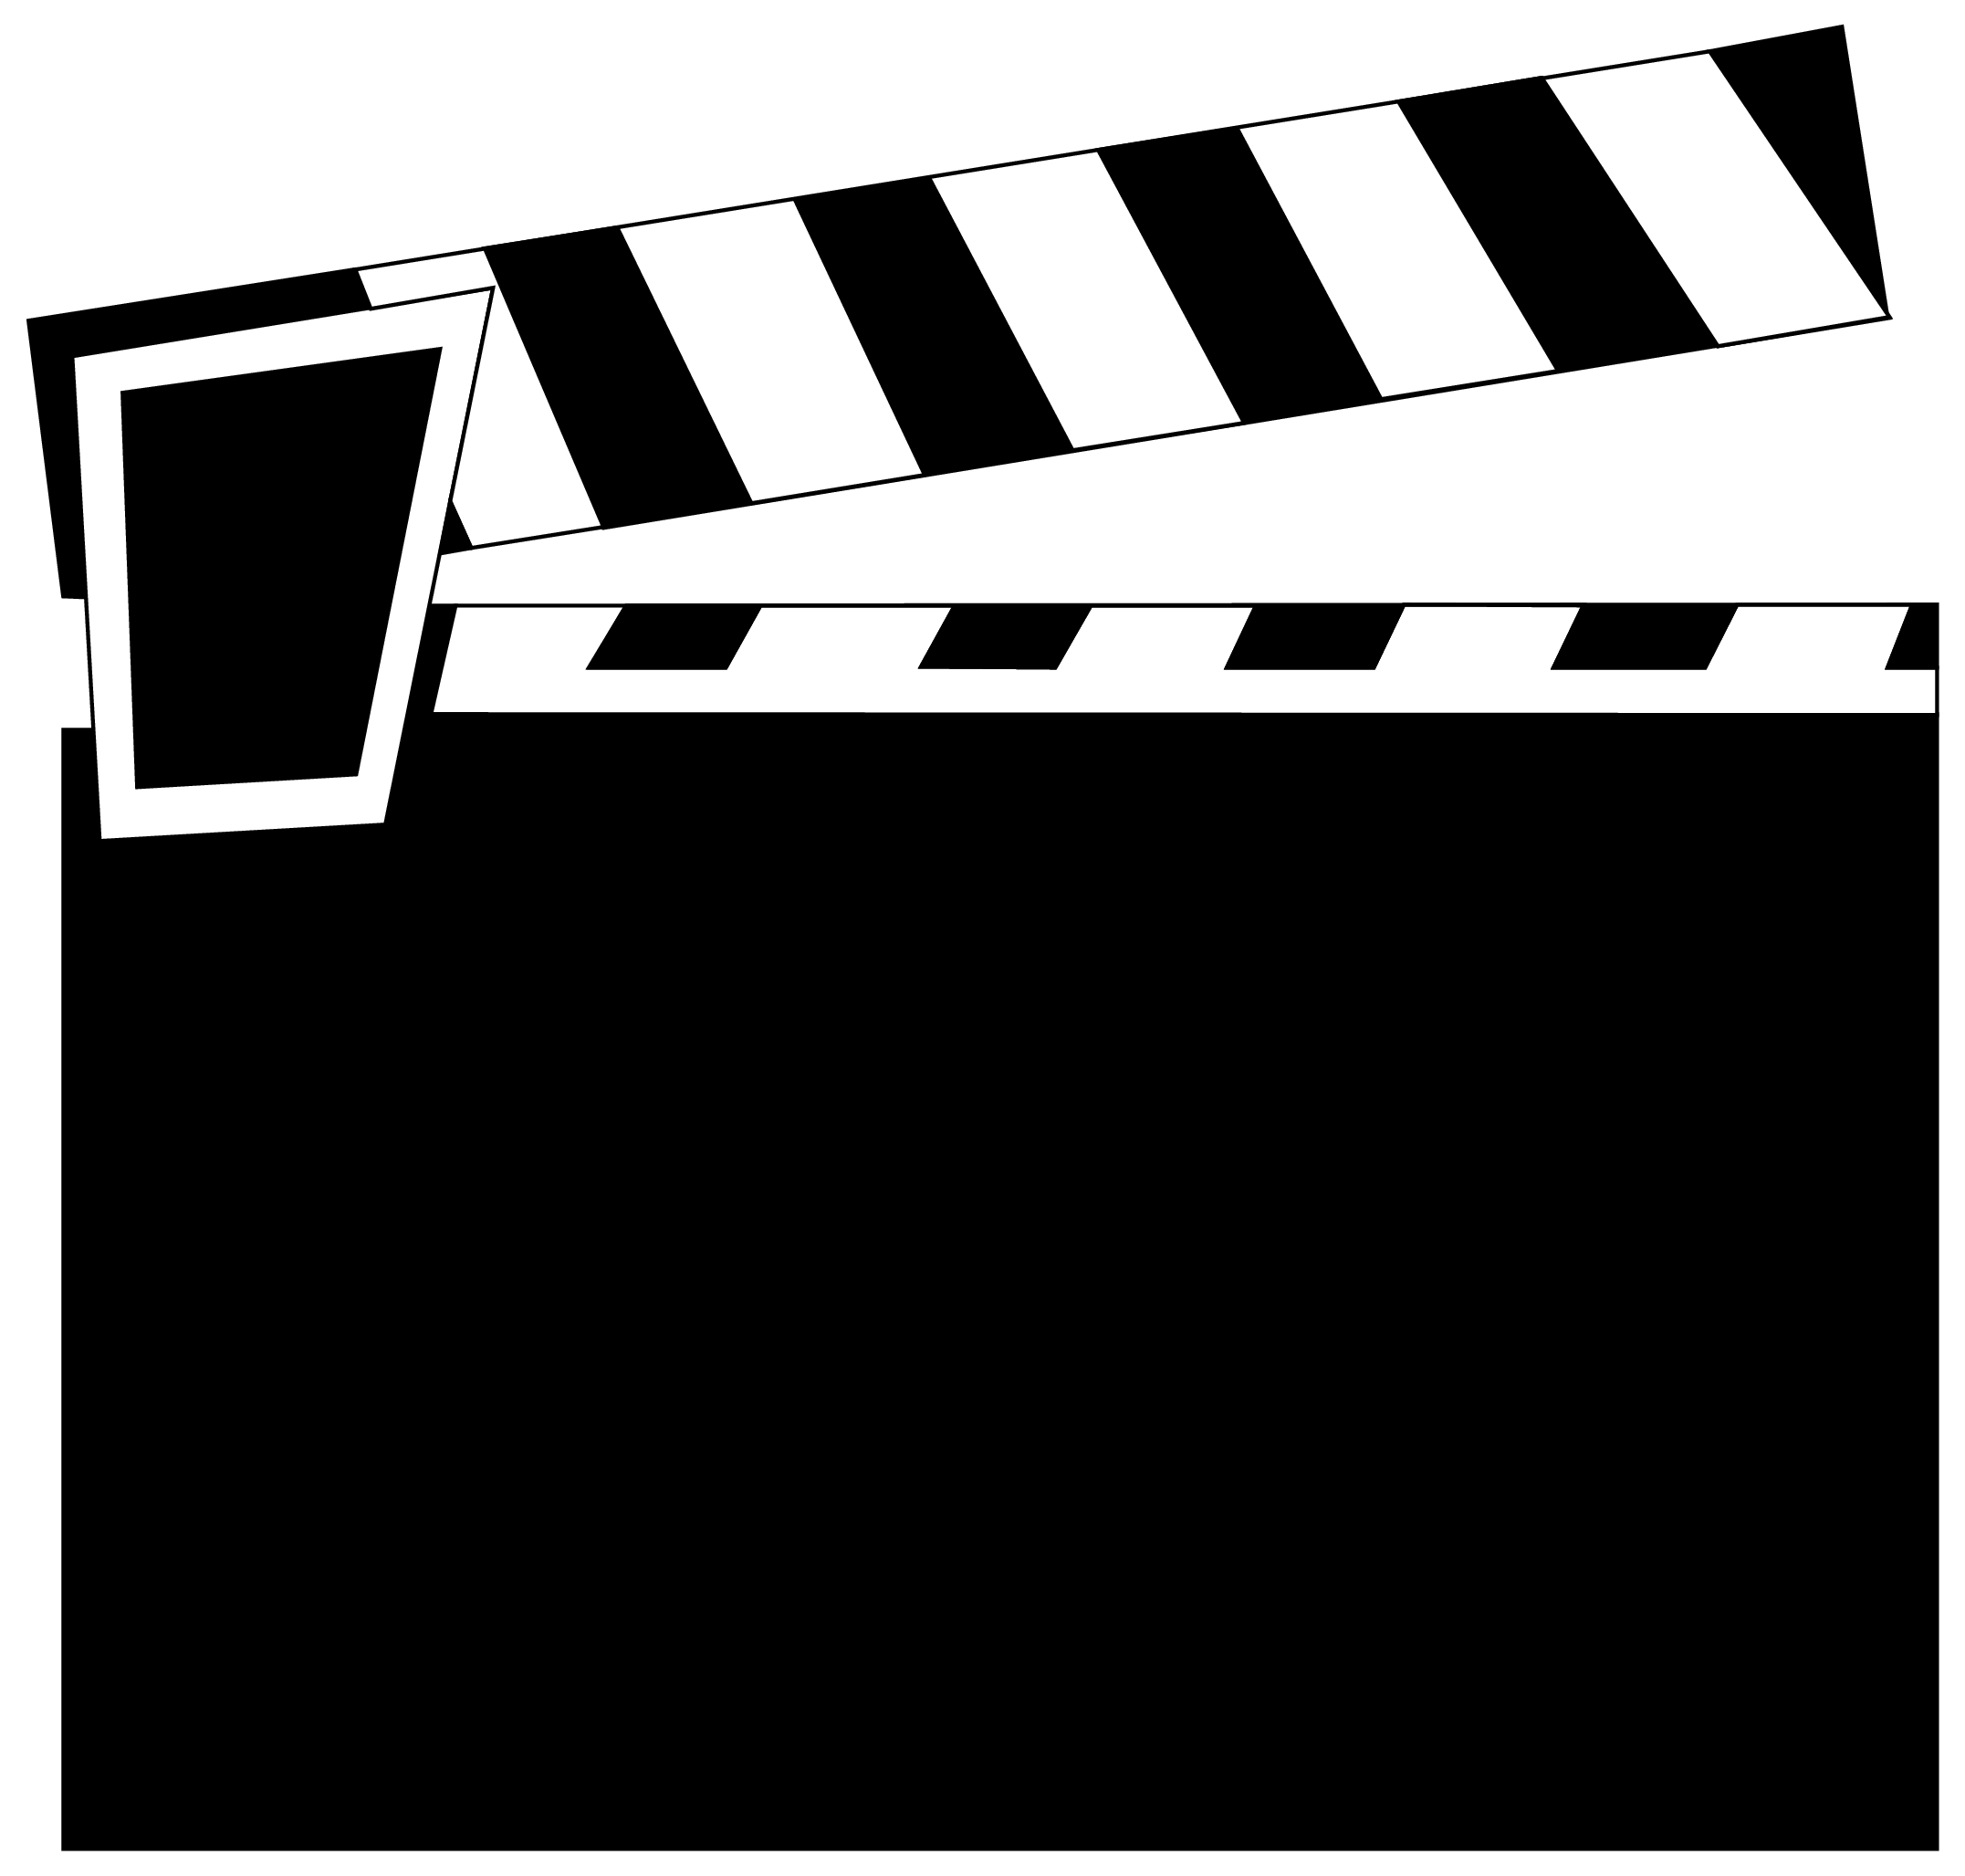 Clapboard cliparts free.